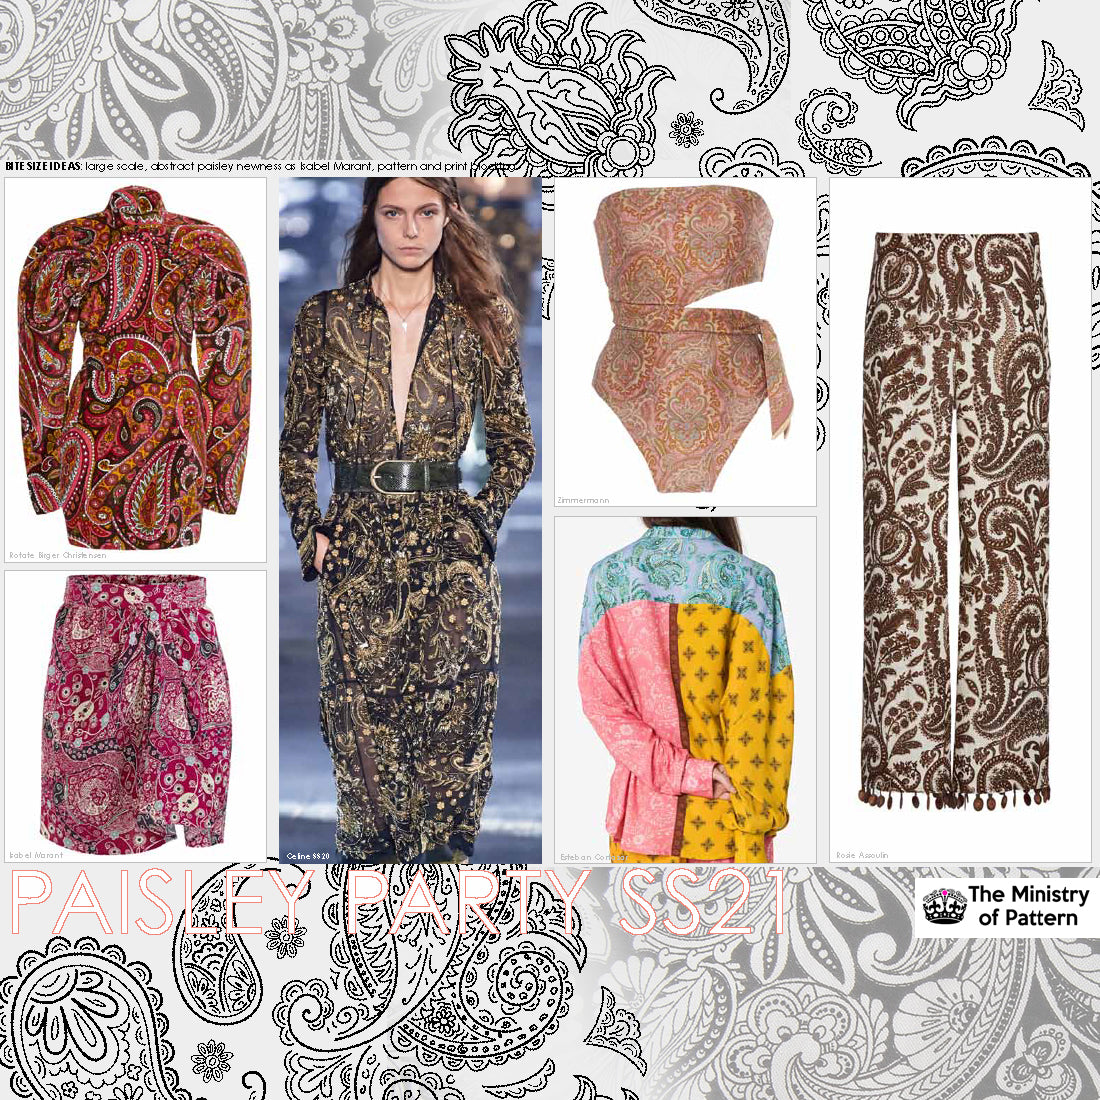 Paisley Party SS21